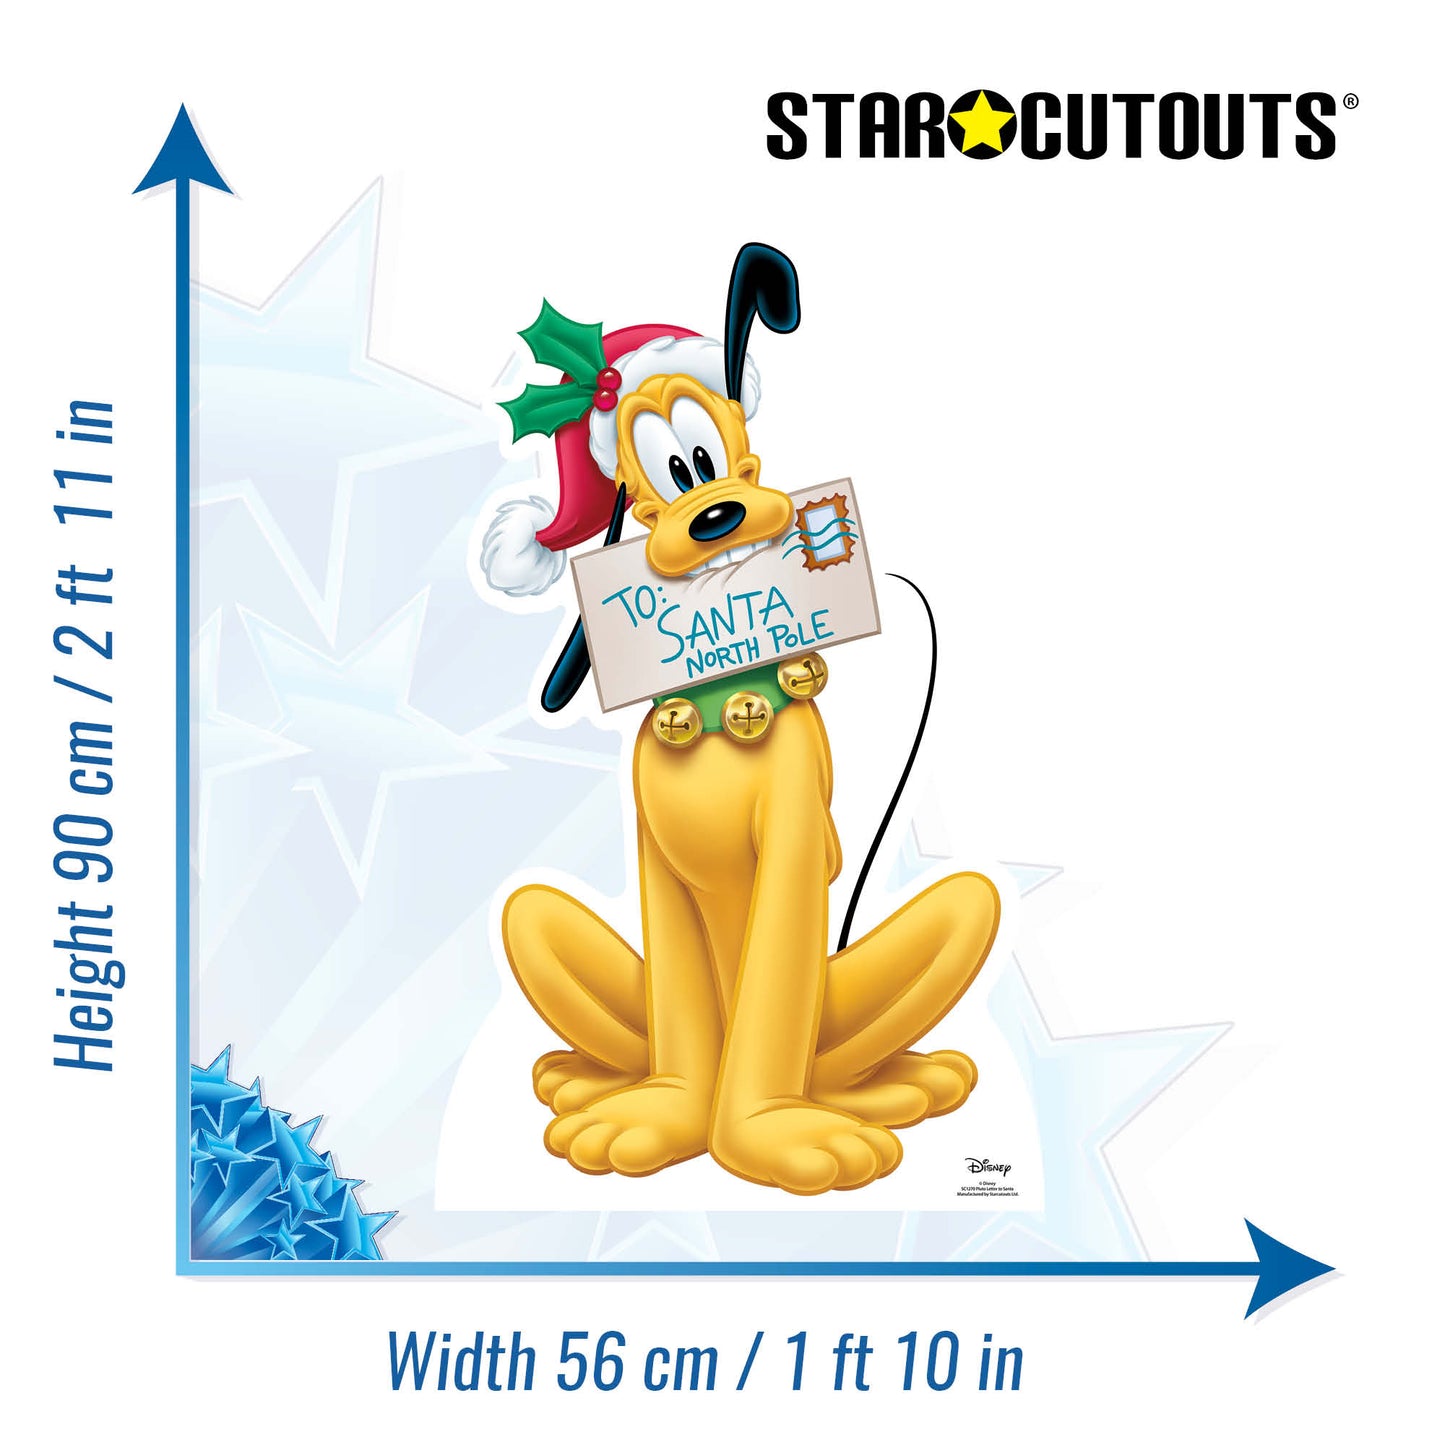 Pluto Dog With Christmas Letter Cardboard Cutout